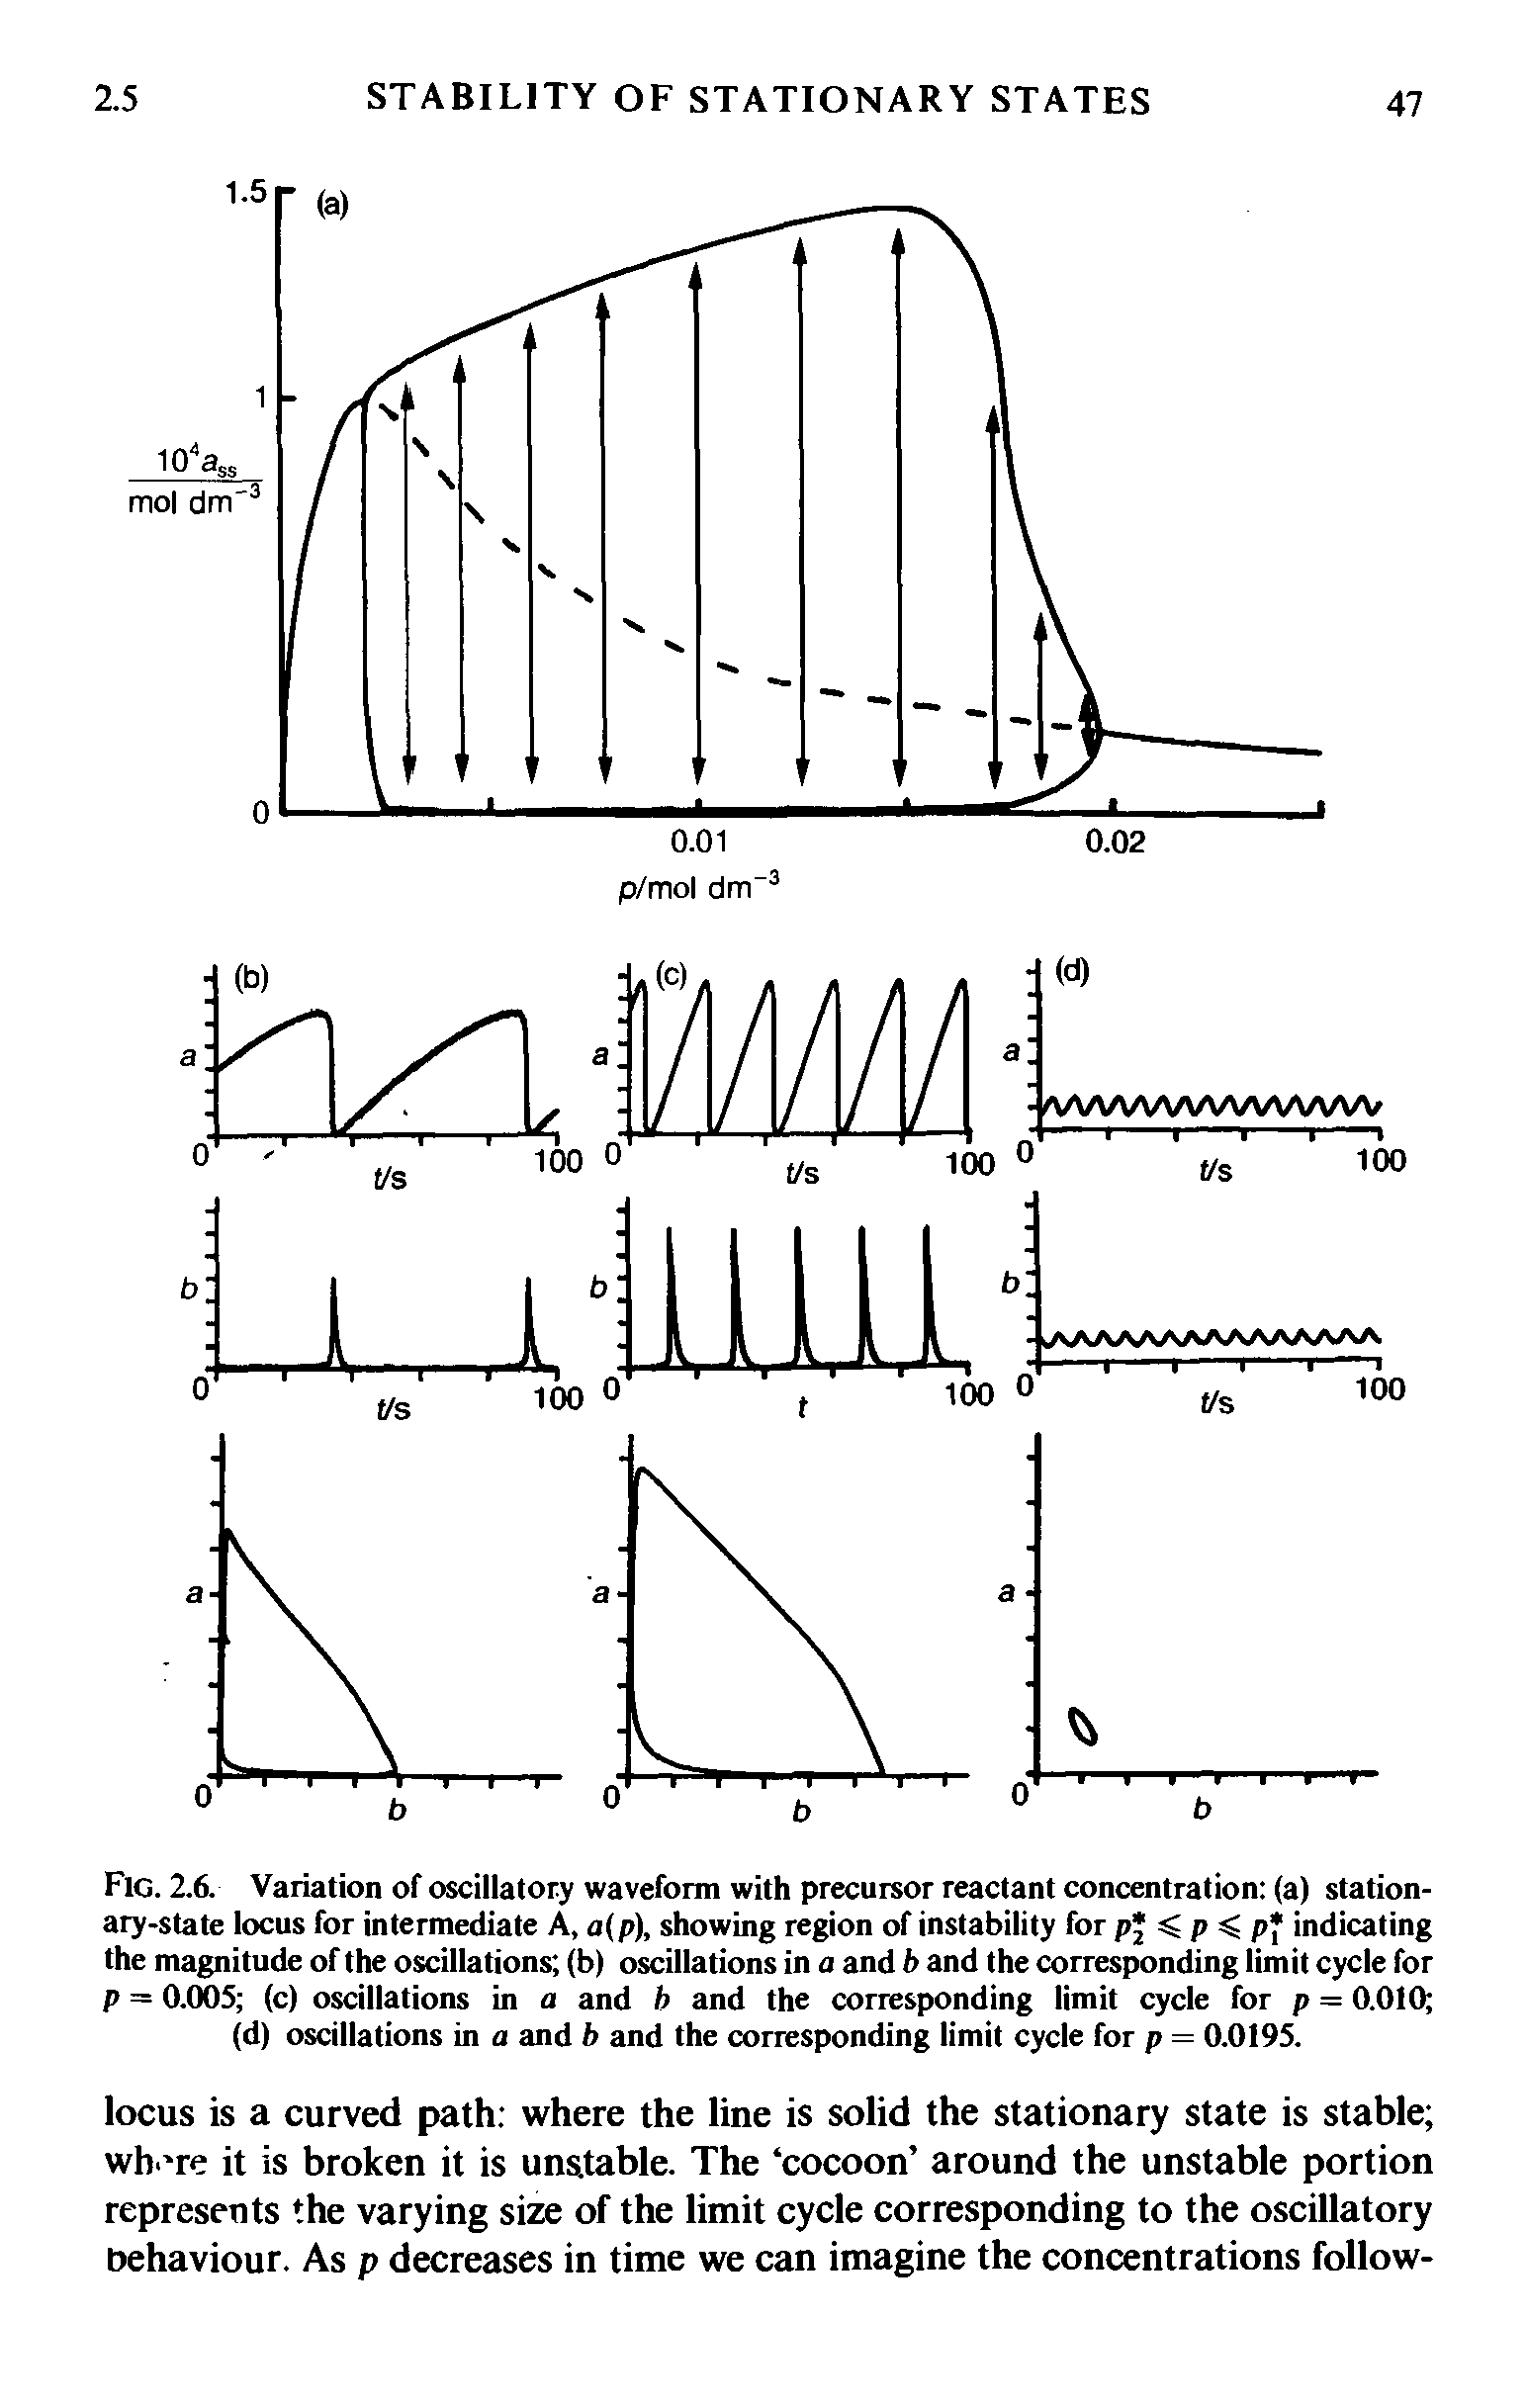 Fig. 2.6. Variation of oscillatory waveform with precursor reactant concentration (a) stationary-state locus for intermediate A, a(p), showing region of instability for p < p < p indicating the magnitude of the oscillations (b) oscillations in a and b and the corresponding limit cycle for p = 0.005 (c) oscillations in a and h and the corresponding limit cycle for p = 0.010 (d) oscillations in a and b and the corresponding limit cycle for p = 0.0195.